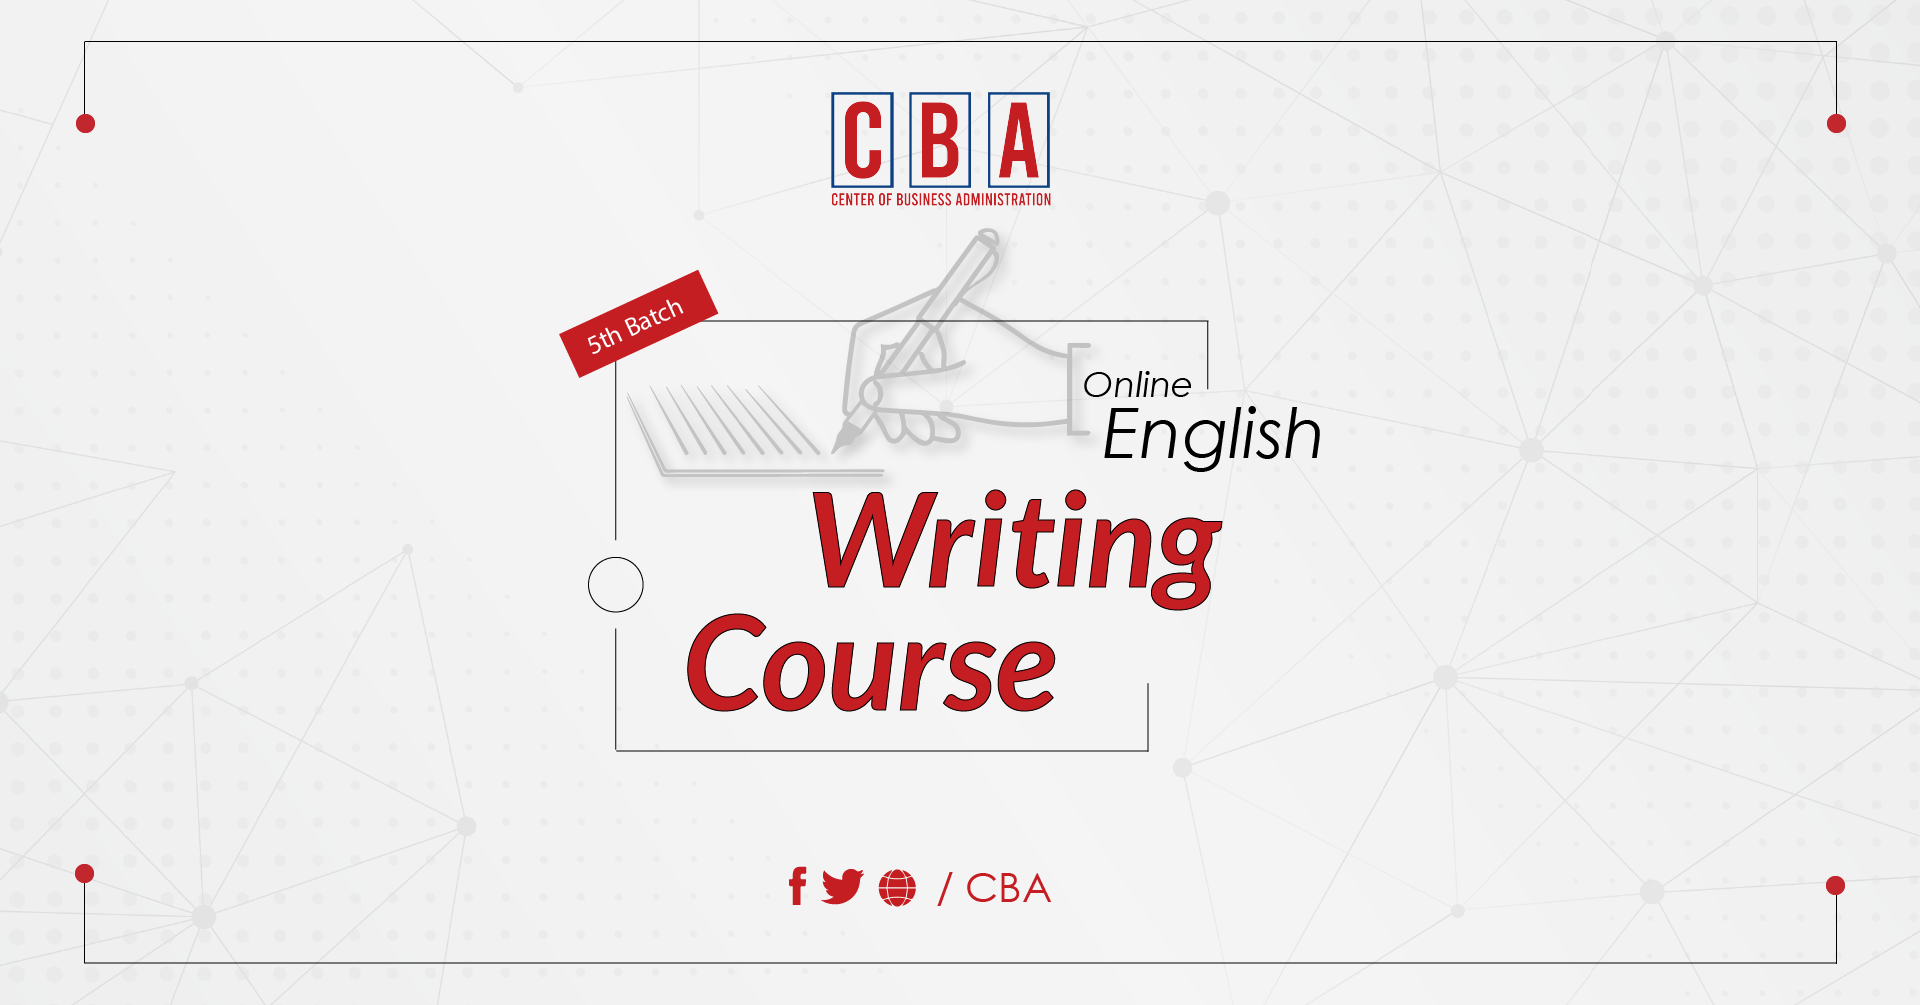 5th Batch Online English Writing Course